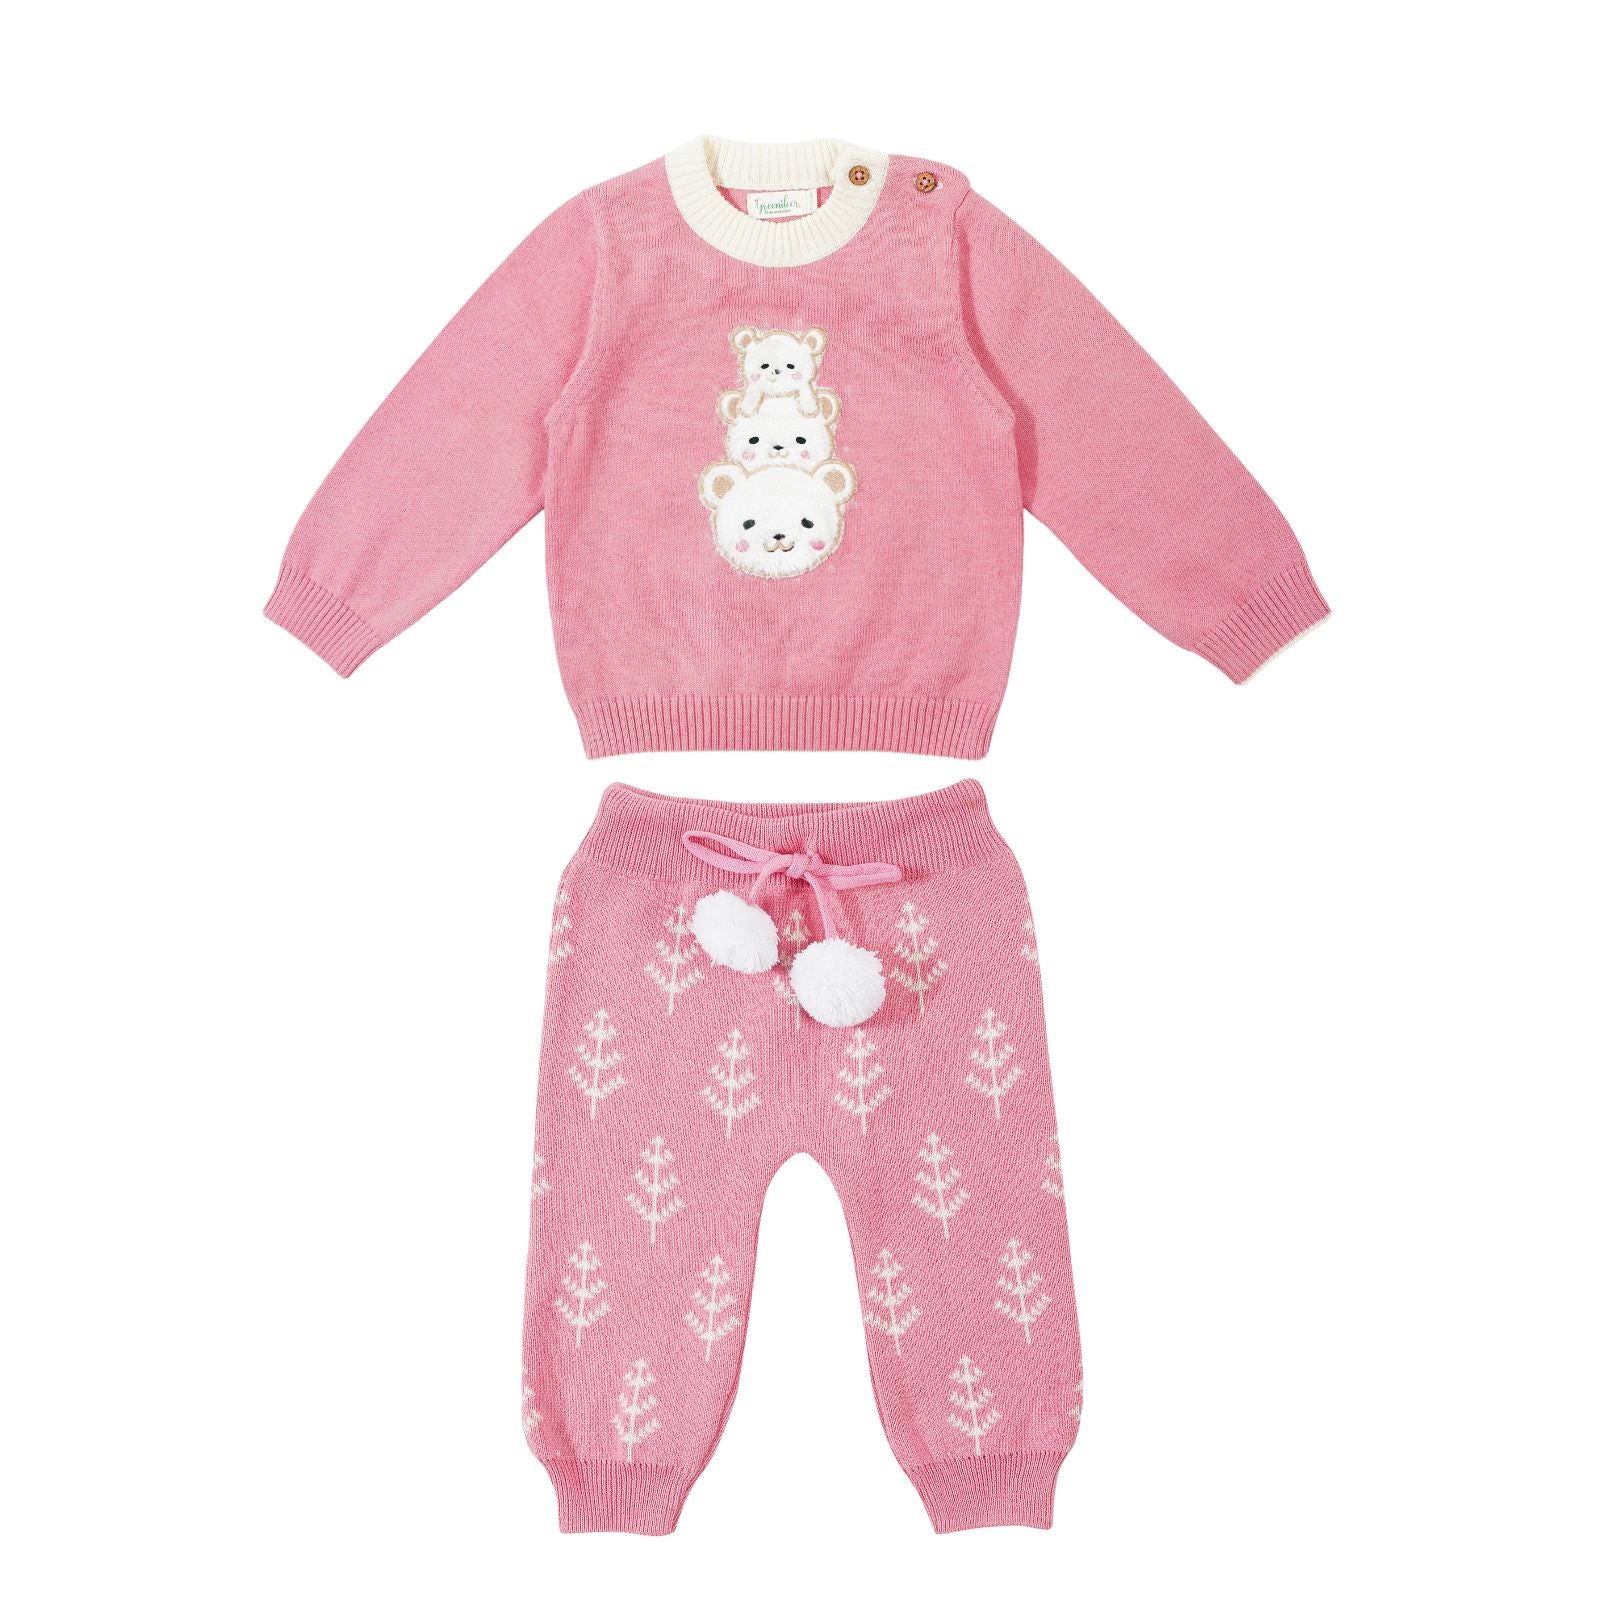 Adorable Bear Family Sweater Set of 2 - Pink